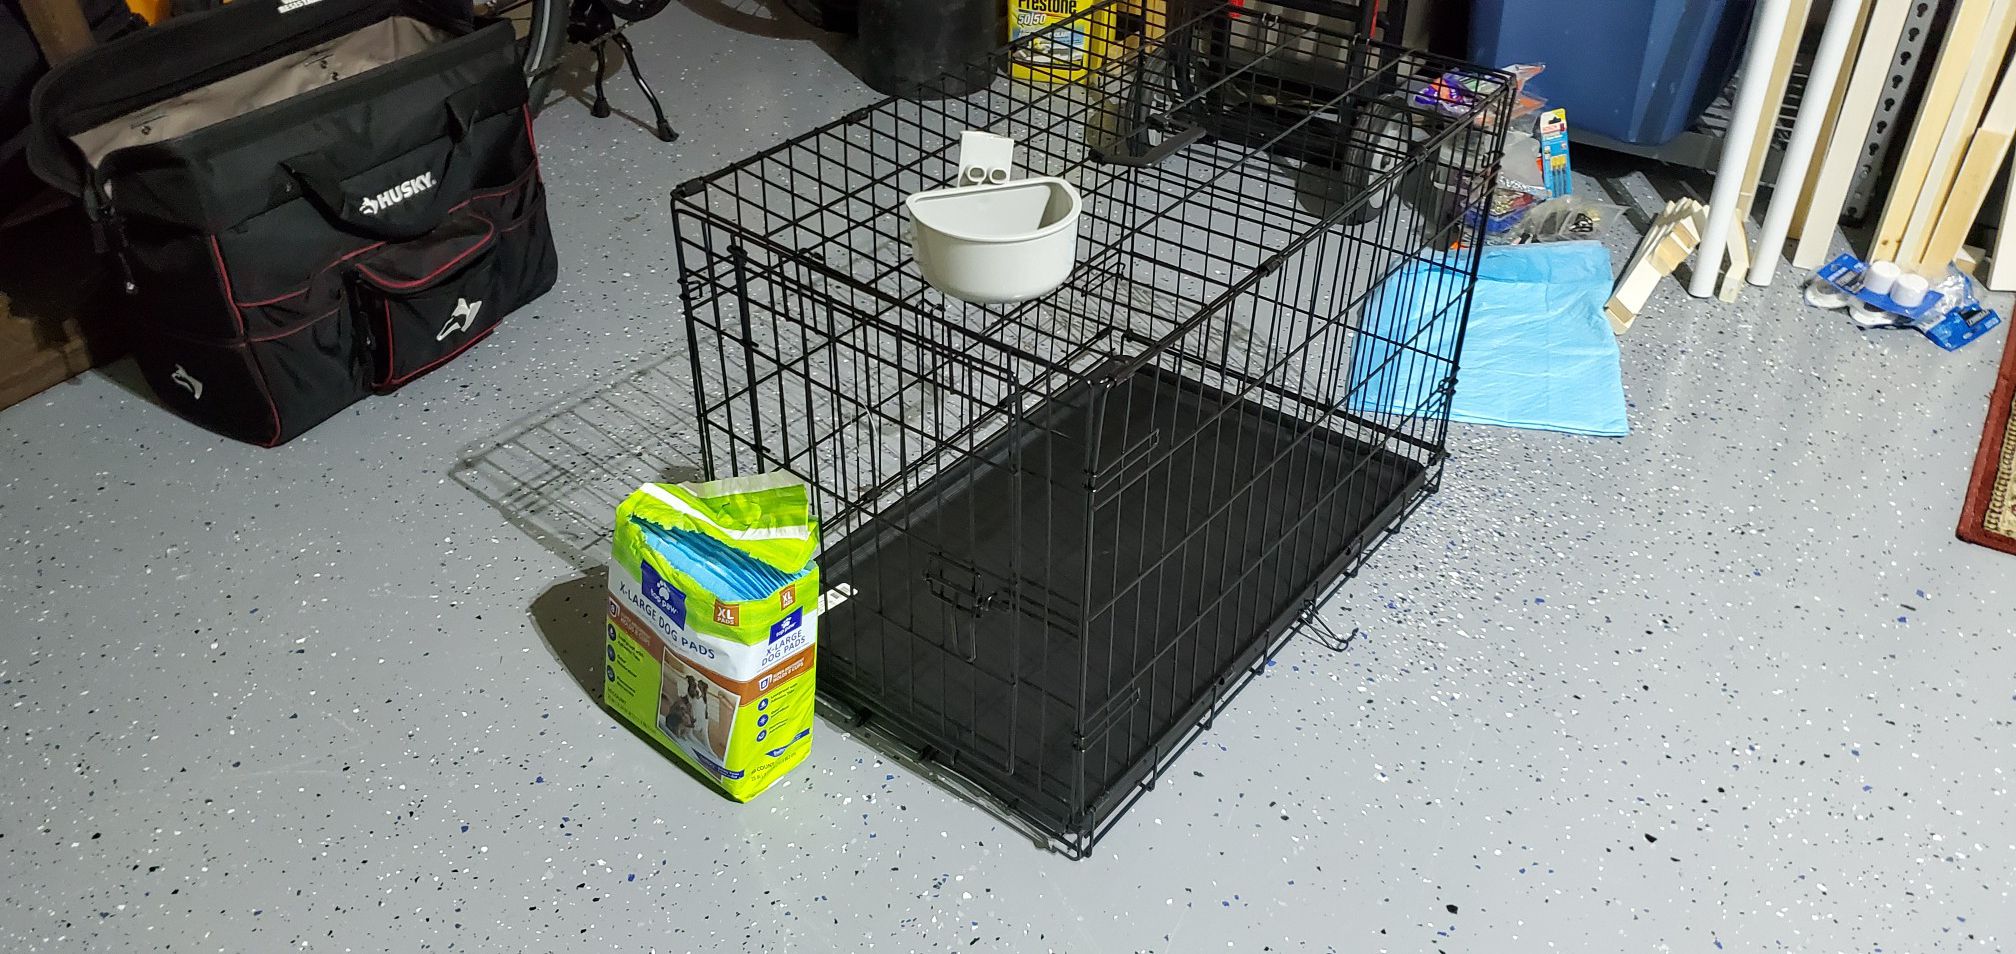 *Sale Pending* Medium collapsible dog crate